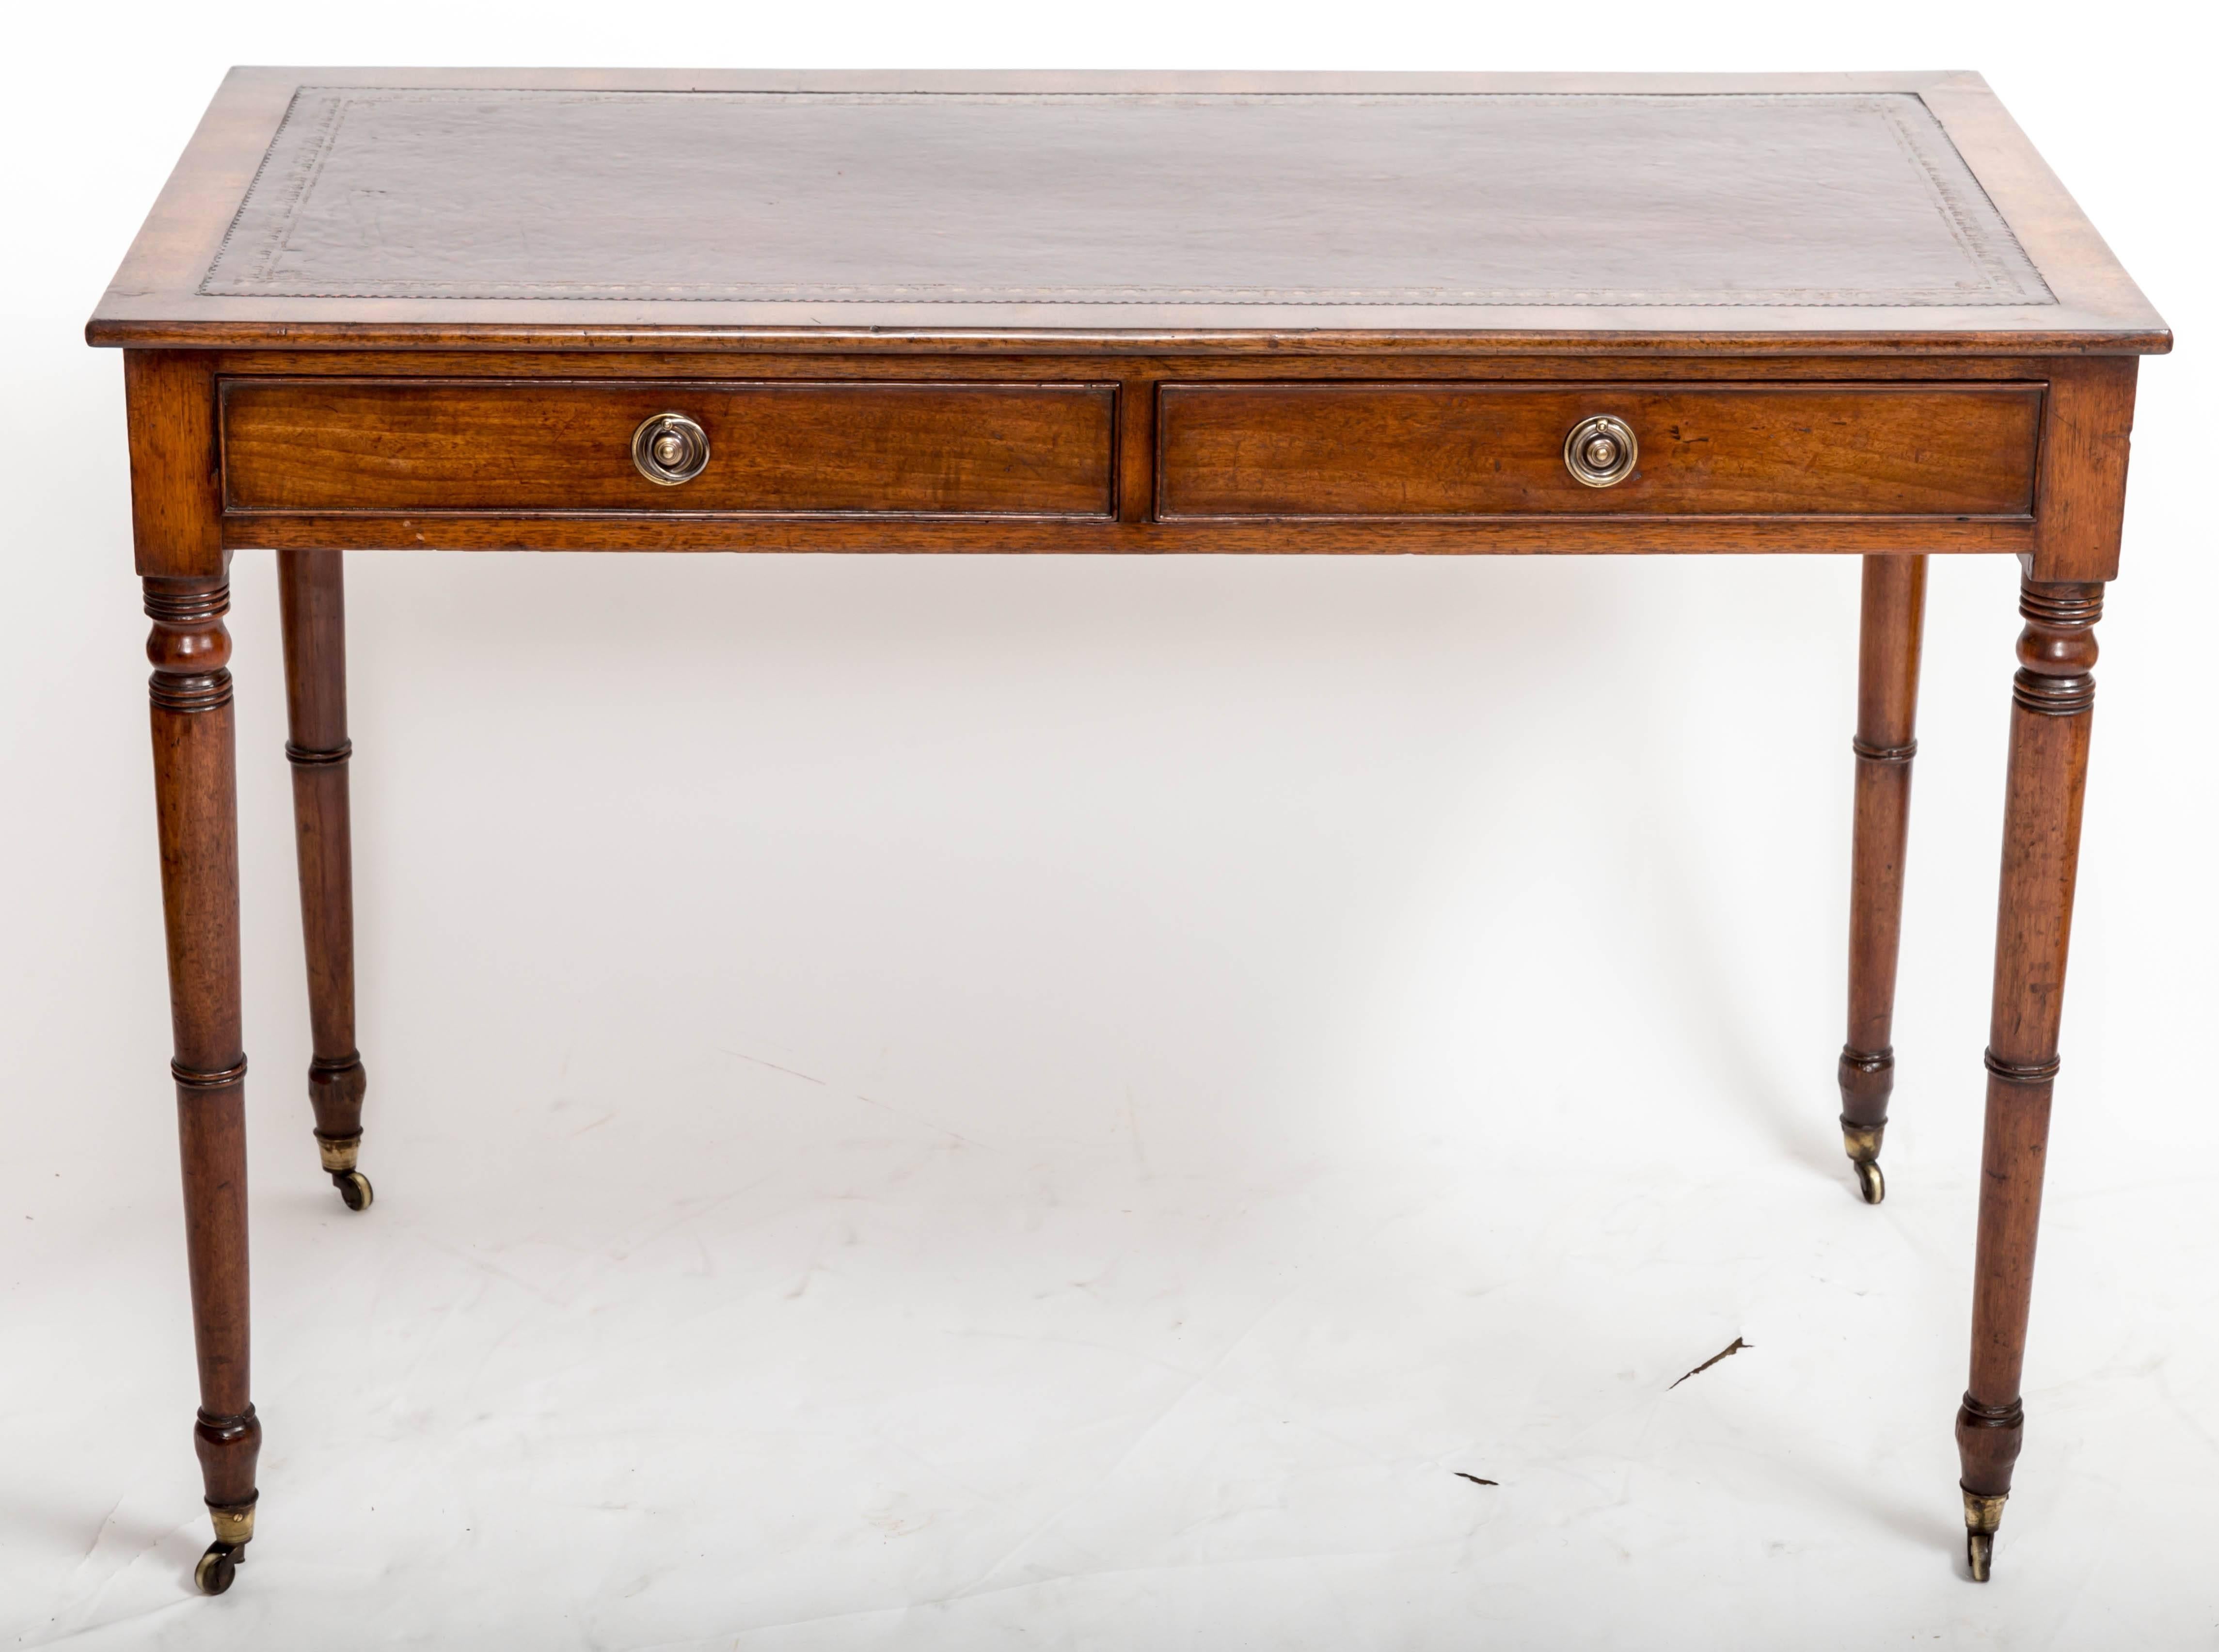 Two-drawer mahogany writing table with two drawers with brass pulls, turned legs with original brass casters and antique wine-colored leather insert. Measures: 42